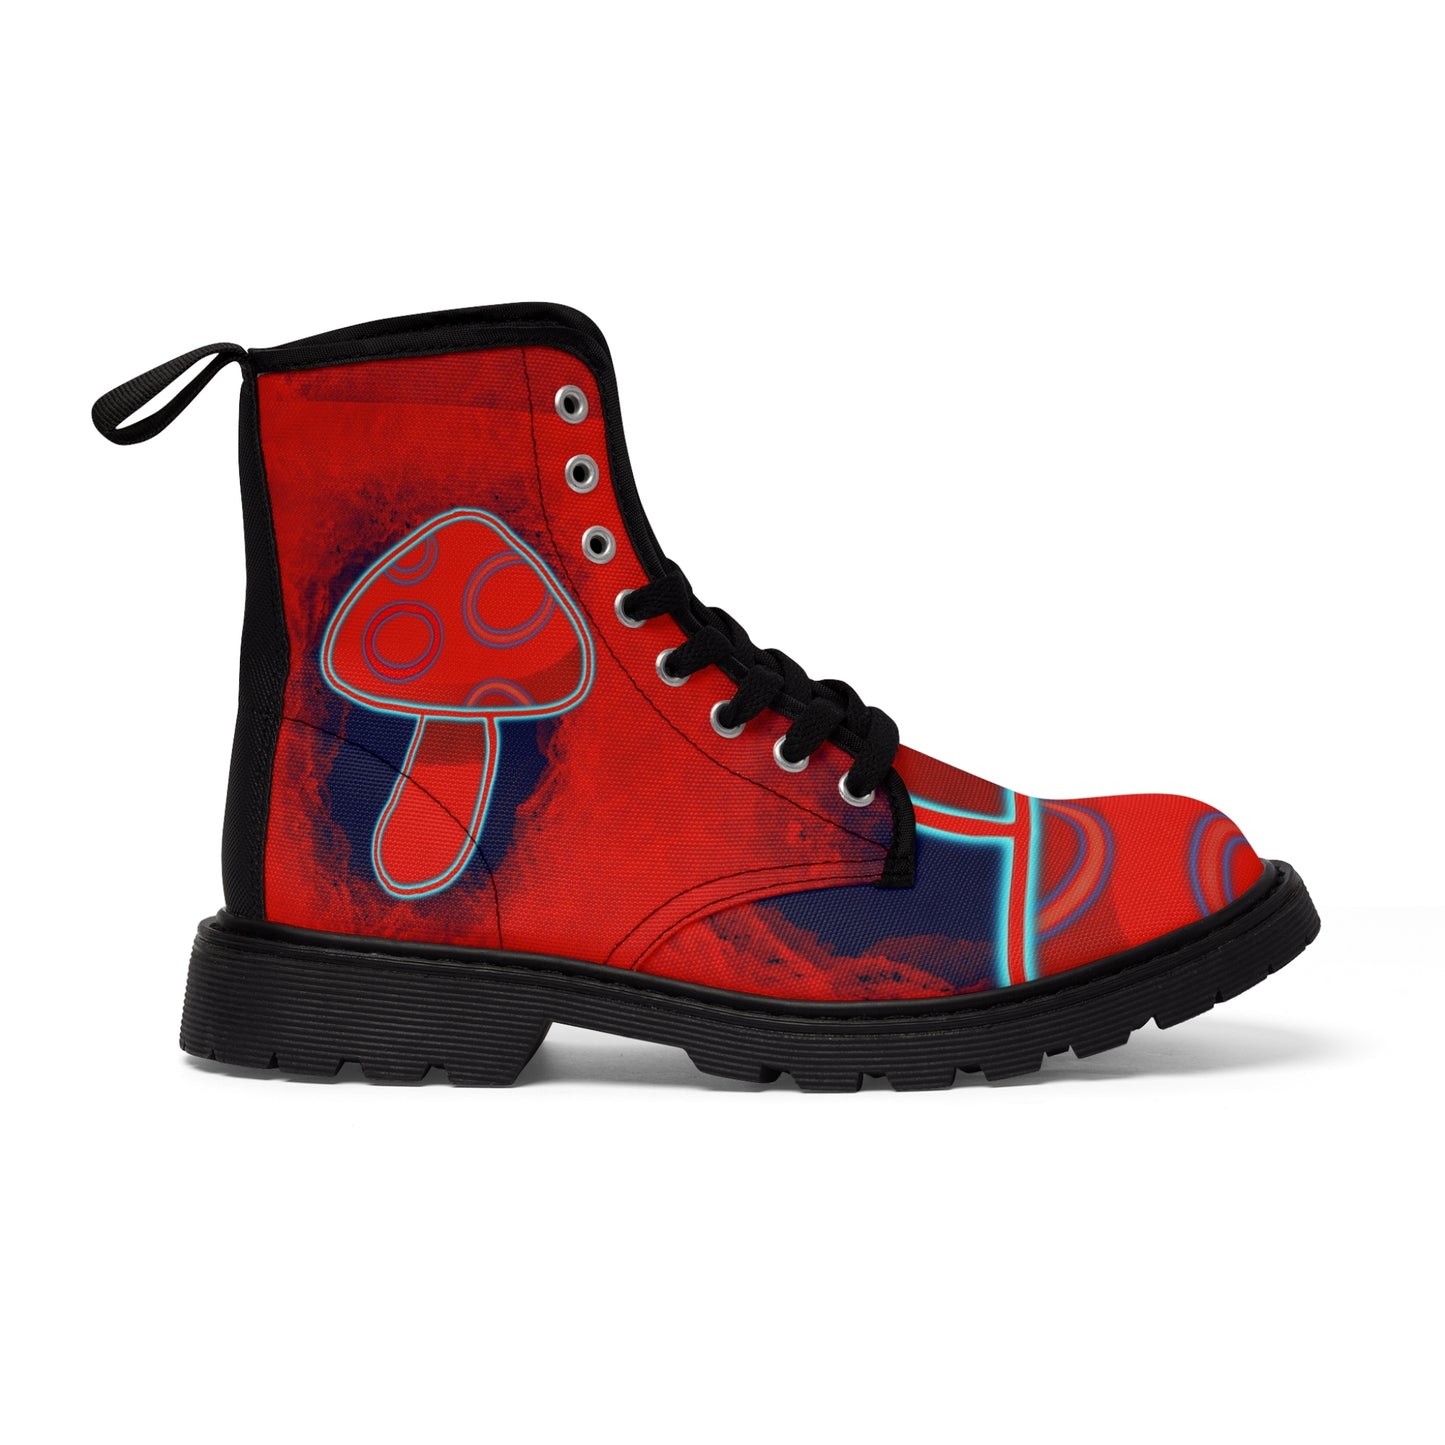 Women's Canvas Boots "Toxic"